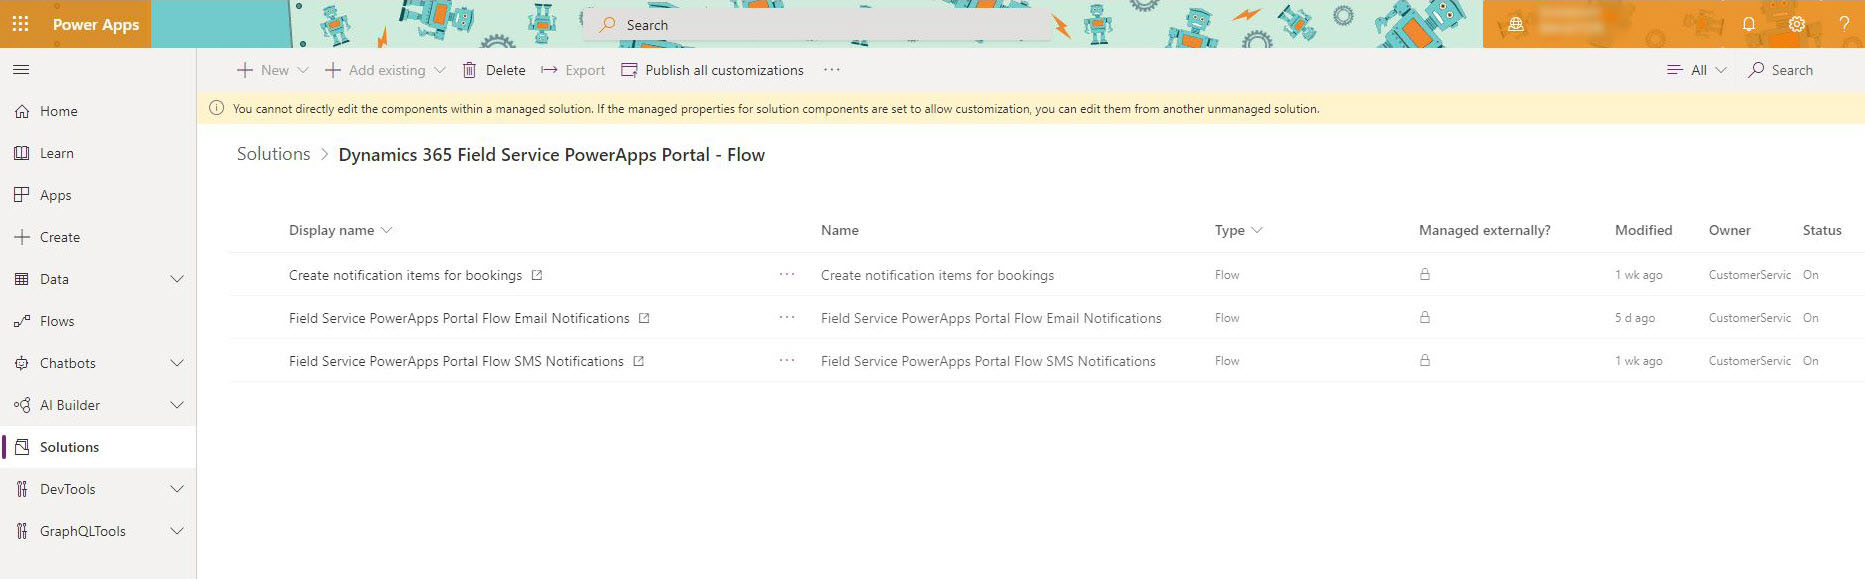 List of flows available in the "Dynamics 365 Field Service PowerApps Portal – Flow" solution.